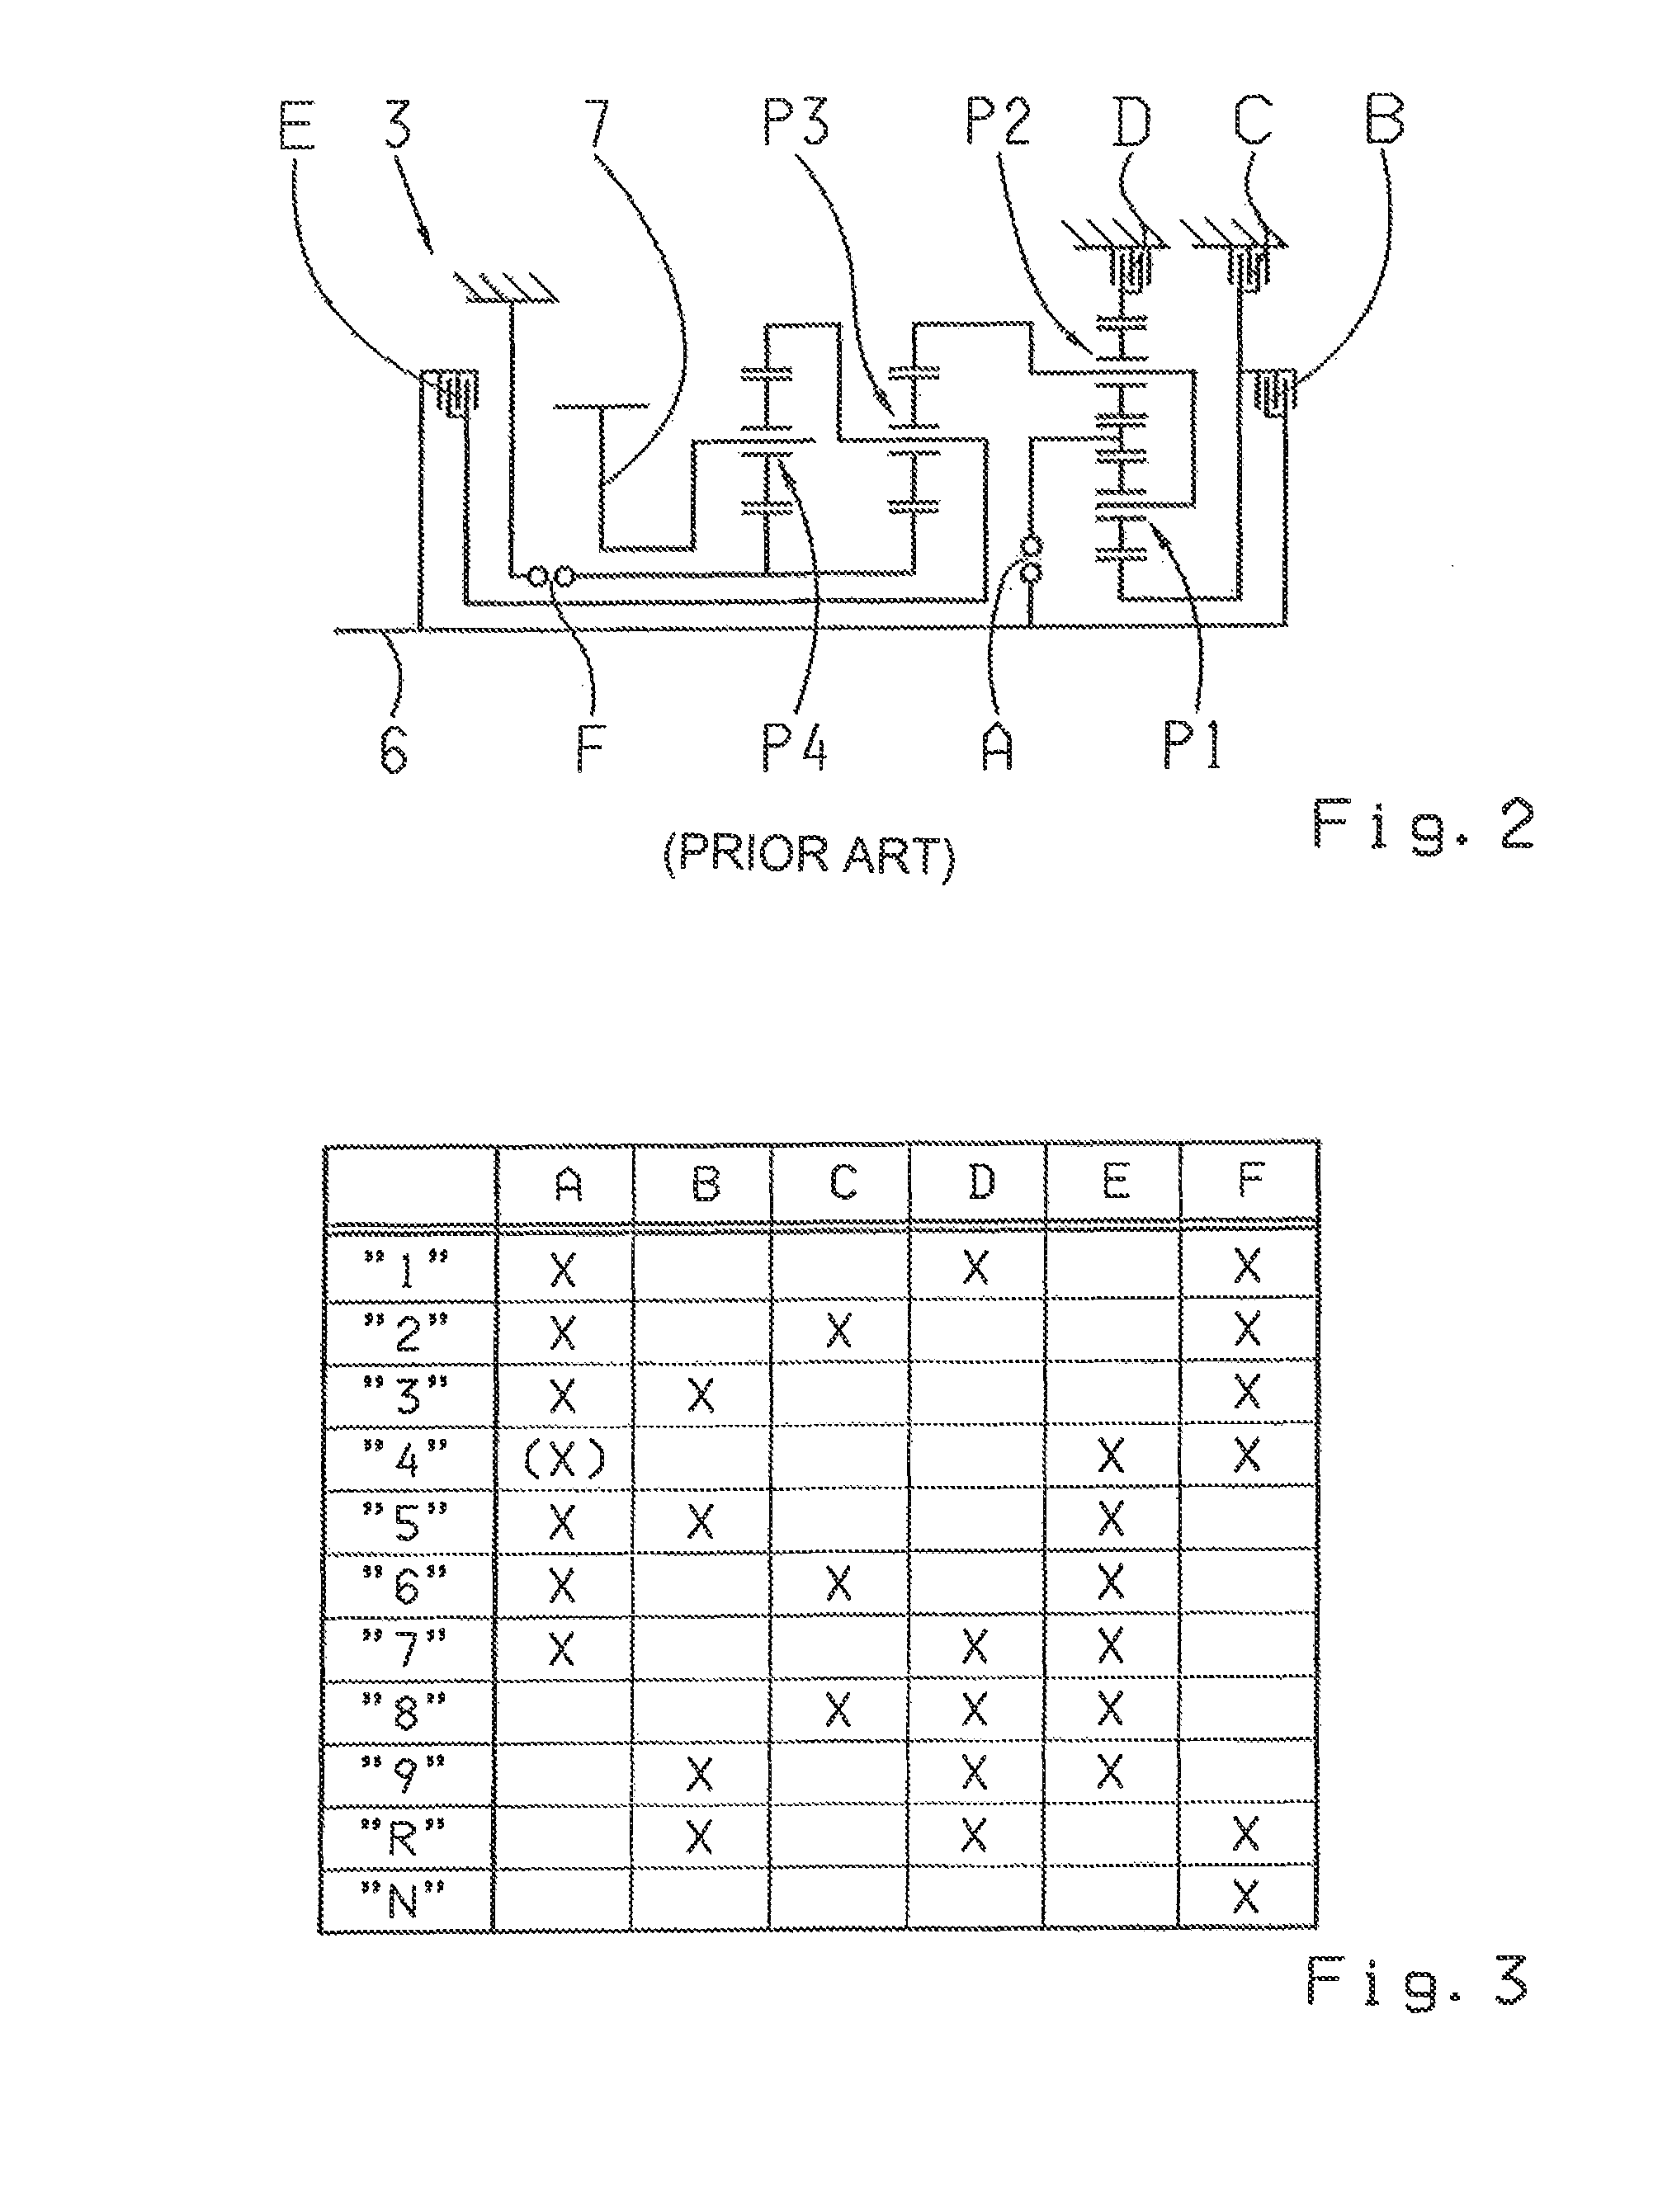 Method for operating a transmission device having a plurality of friction-fit shift elements and at least one form-fit shift element